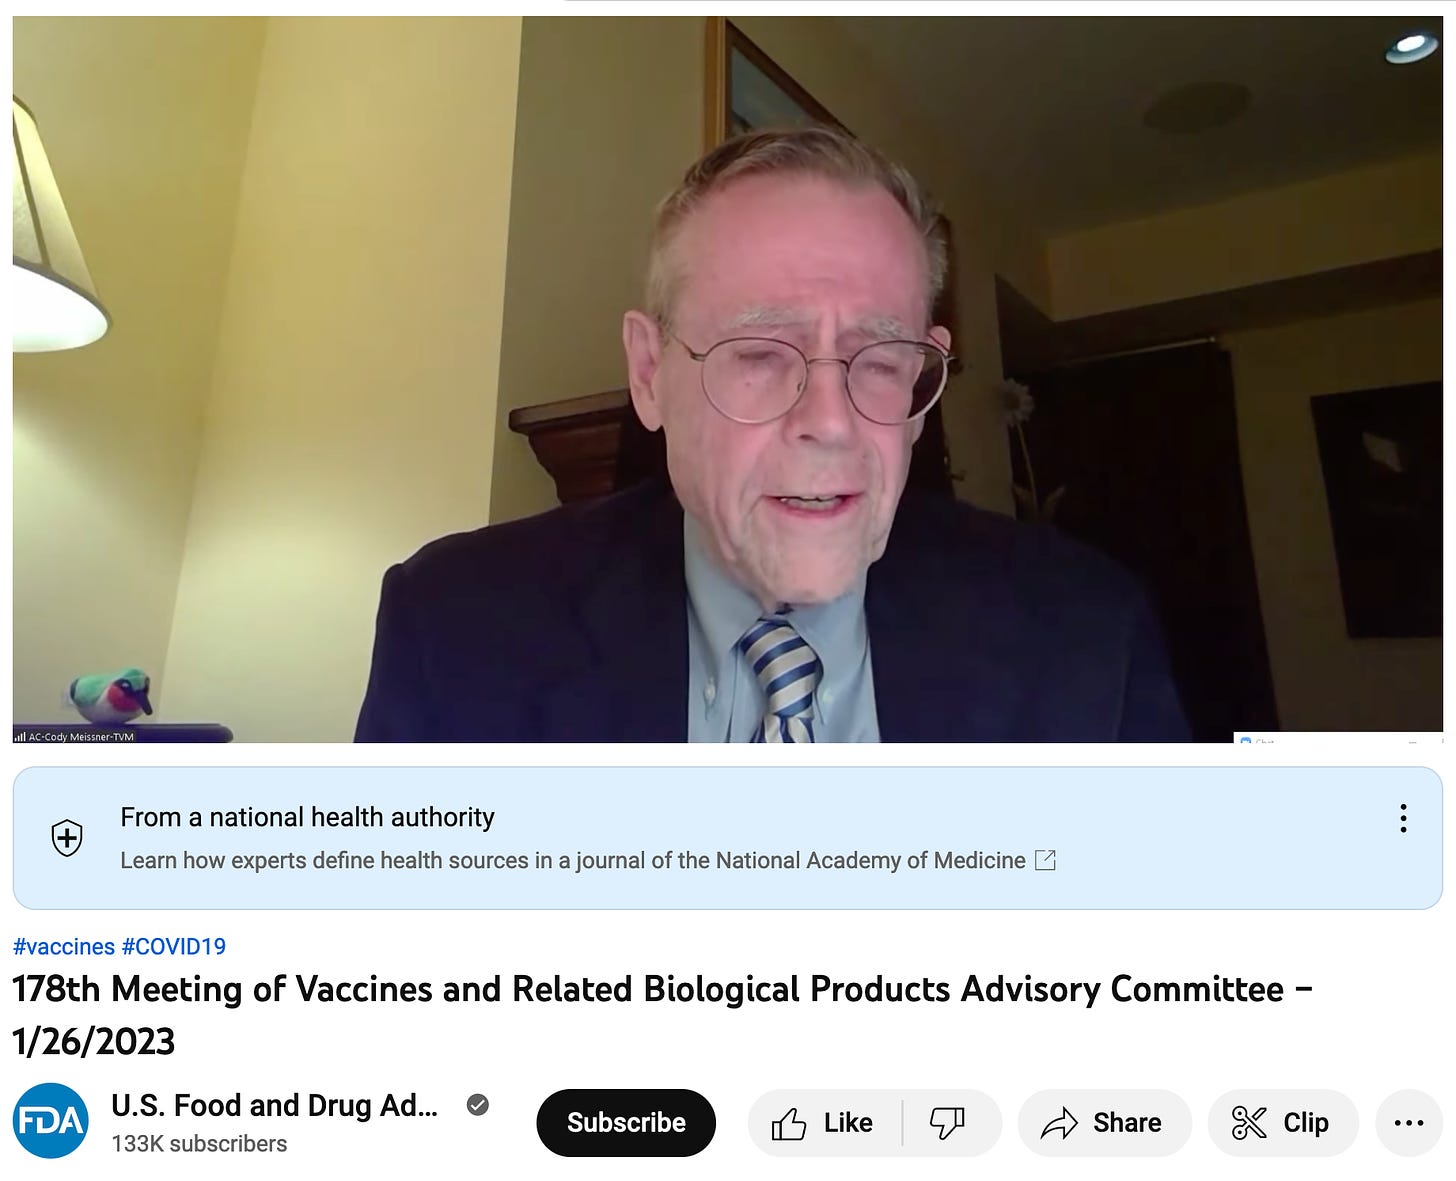 The image is a screenshot of of Dr Cody Meissner speaking in a youtube video on the FDA video for the 178th meeting of vaccines and related biological products advisory committee January 26, 2023 